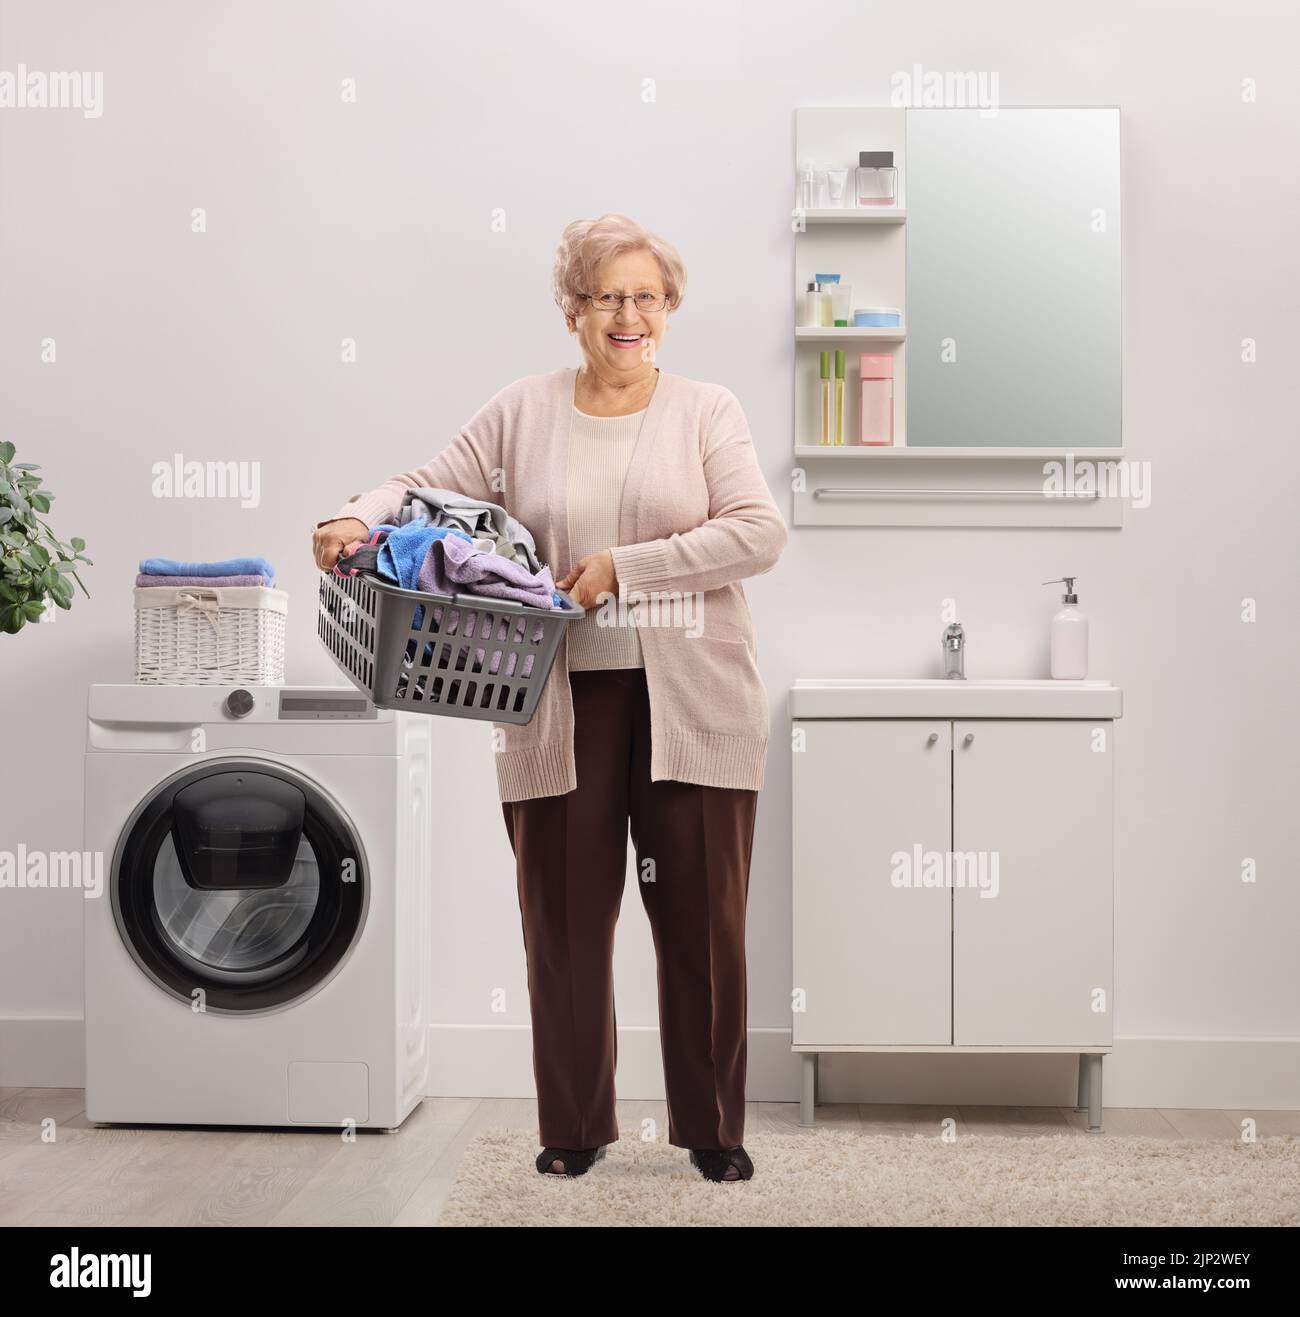 Full length portrait of an elderly woman holding a laundry basket with clothes inside a bathroom Stock Photo